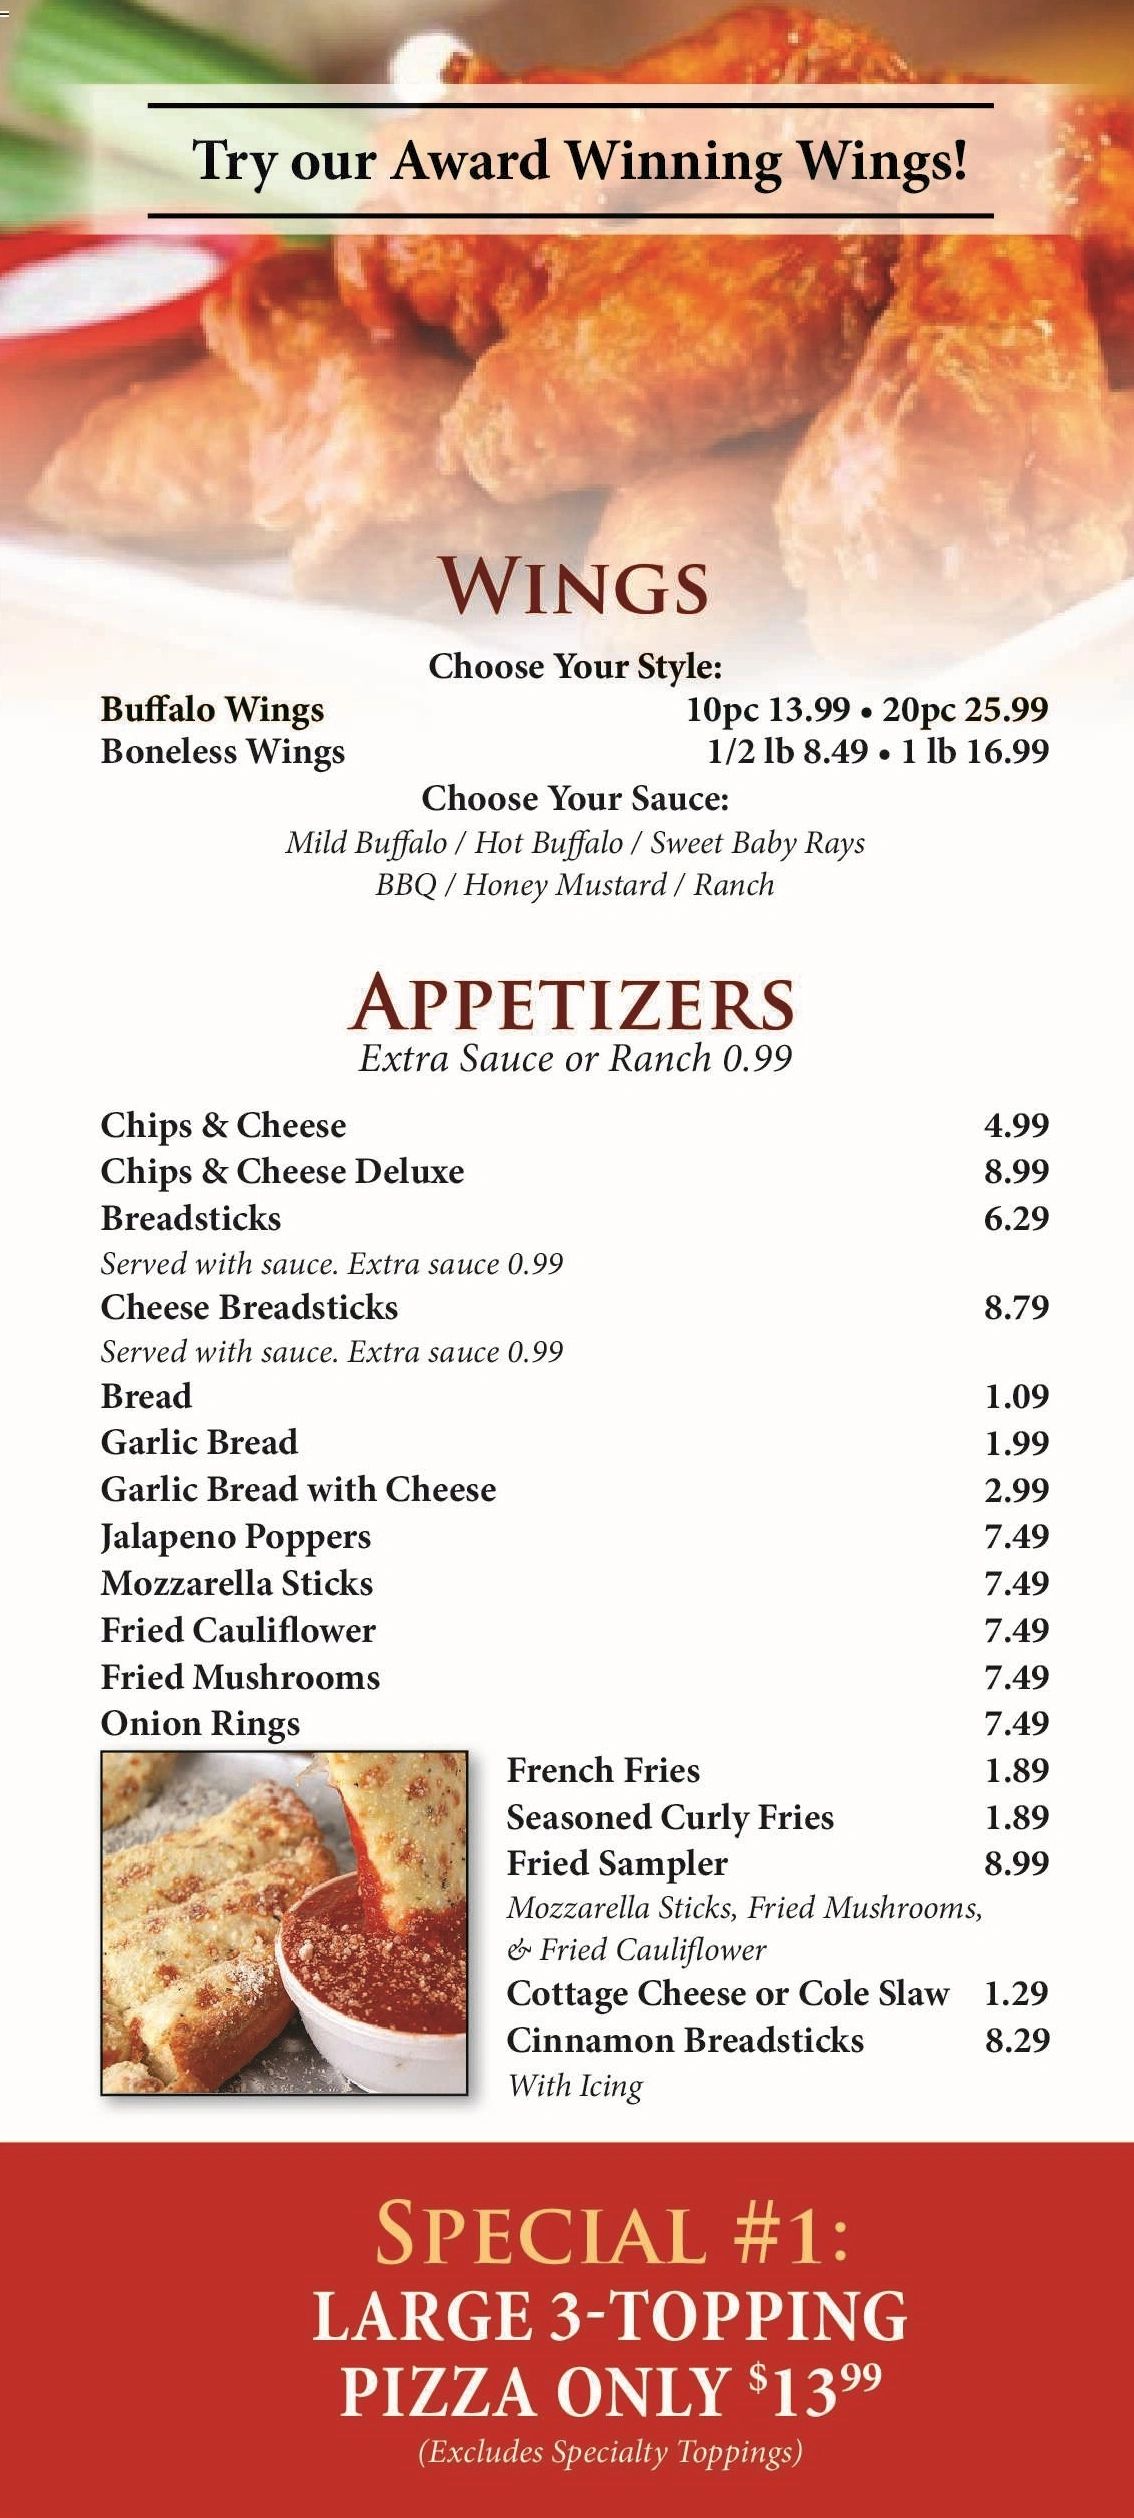 Our chicken wings and Appetizer menu